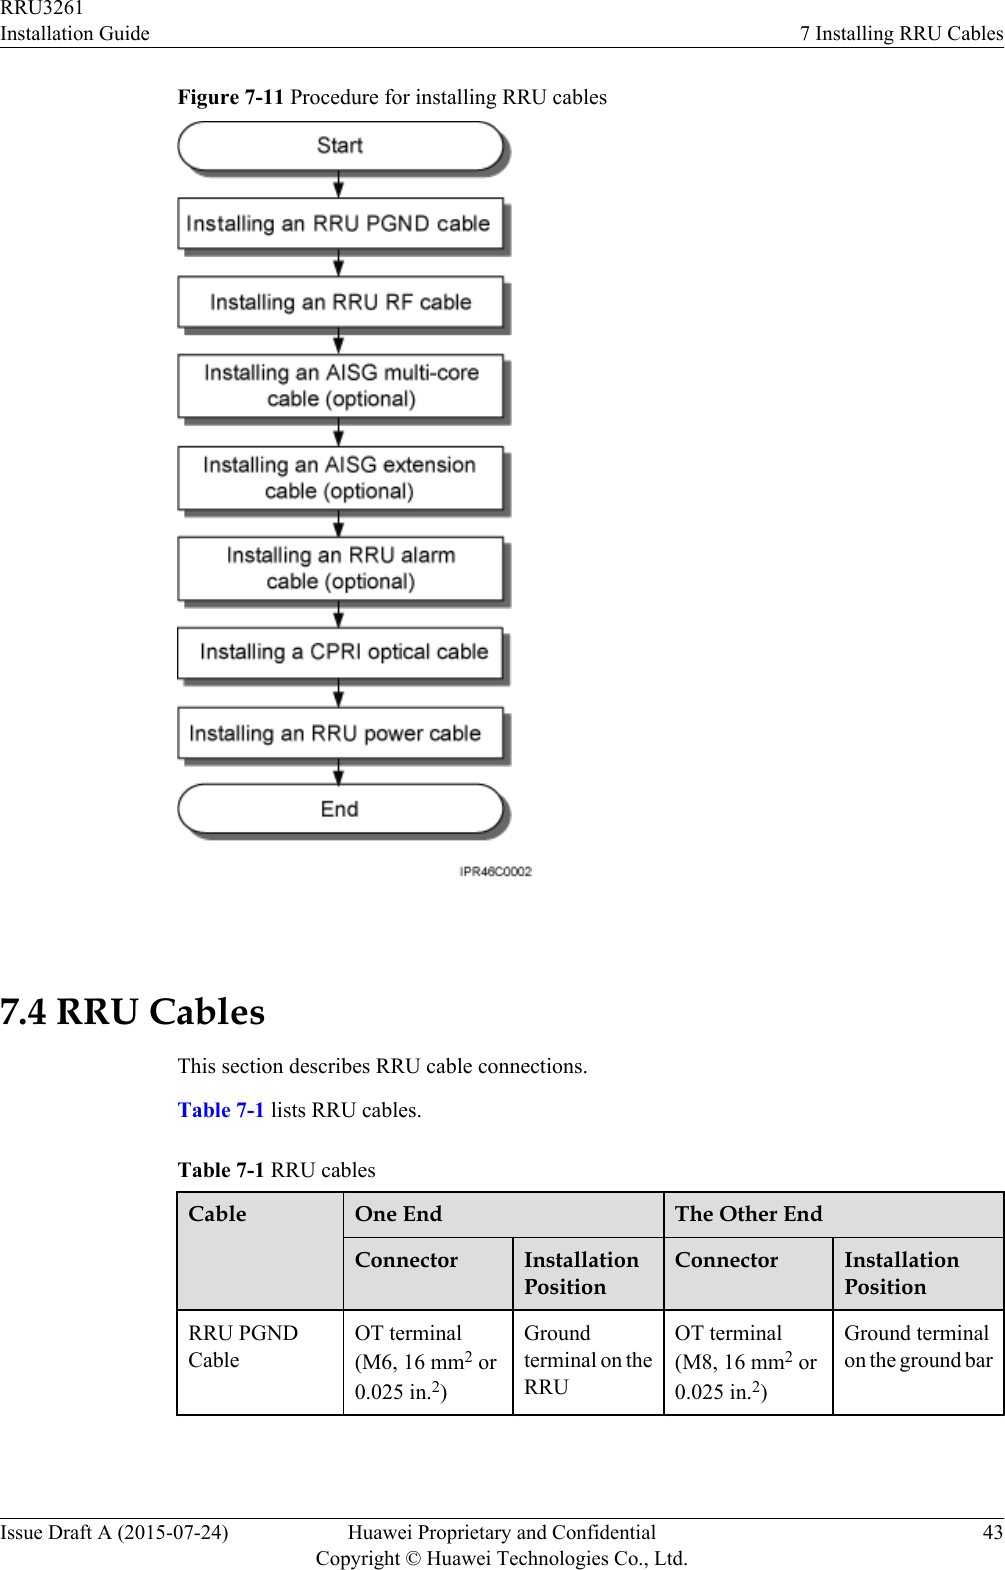 Figure 7-11 Procedure for installing RRU cables 7.4 RRU CablesThis section describes RRU cable connections.Table 7-1 lists RRU cables.Table 7-1 RRU cablesCable One End The Other EndConnector InstallationPositionConnector InstallationPositionRRU PGNDCableOT terminal(M6, 16 mm2 or0.025 in.2)Groundterminal on theRRUOT terminal(M8, 16 mm2 or0.025 in.2)Ground terminalon the ground barRRU3261Installation Guide 7 Installing RRU CablesIssue Draft A (2015-07-24) Huawei Proprietary and ConfidentialCopyright © Huawei Technologies Co., Ltd.43